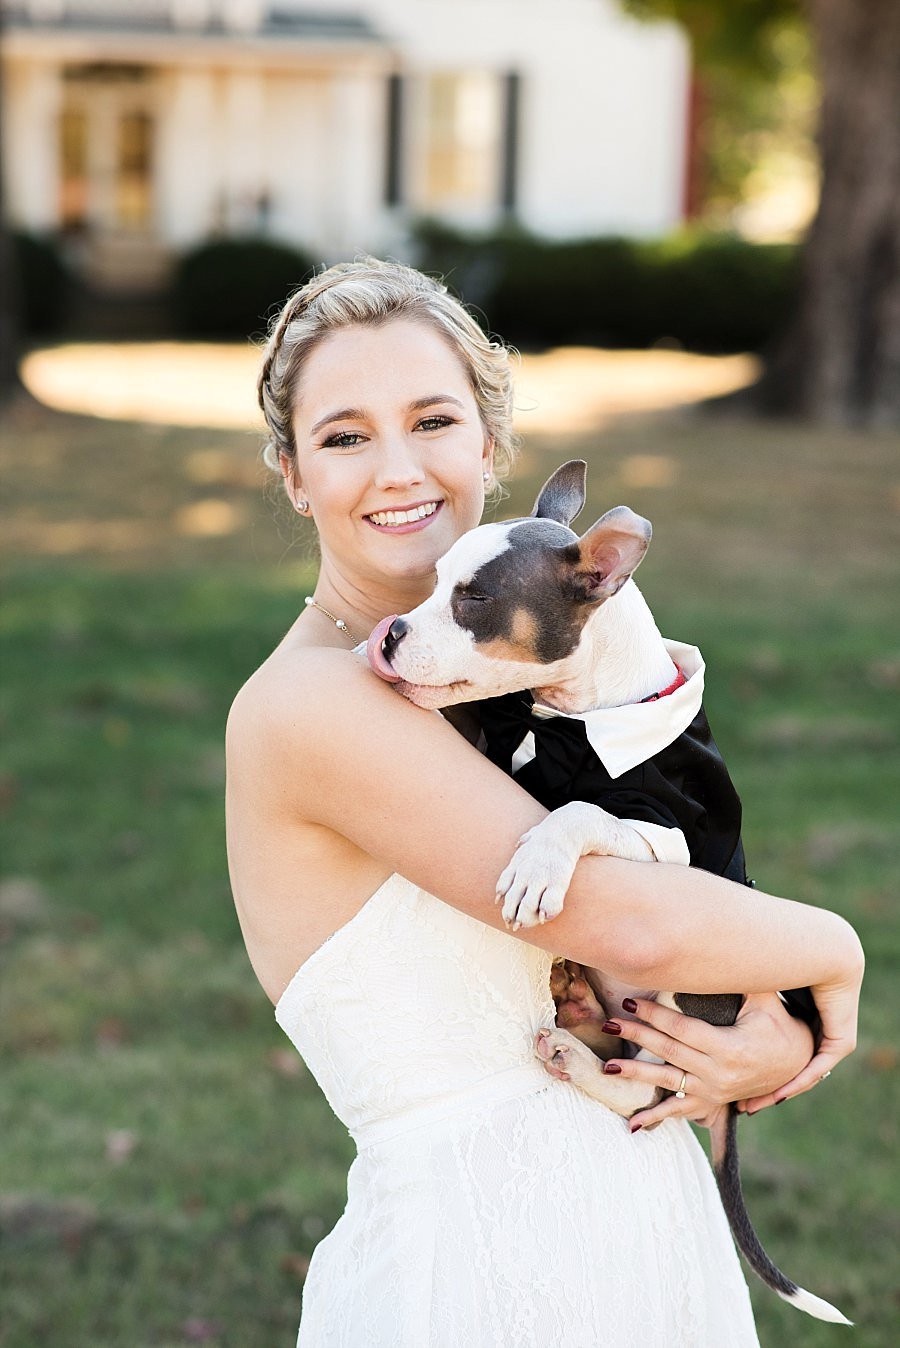 Bride holding a pitbull that is wearing a tuxedo